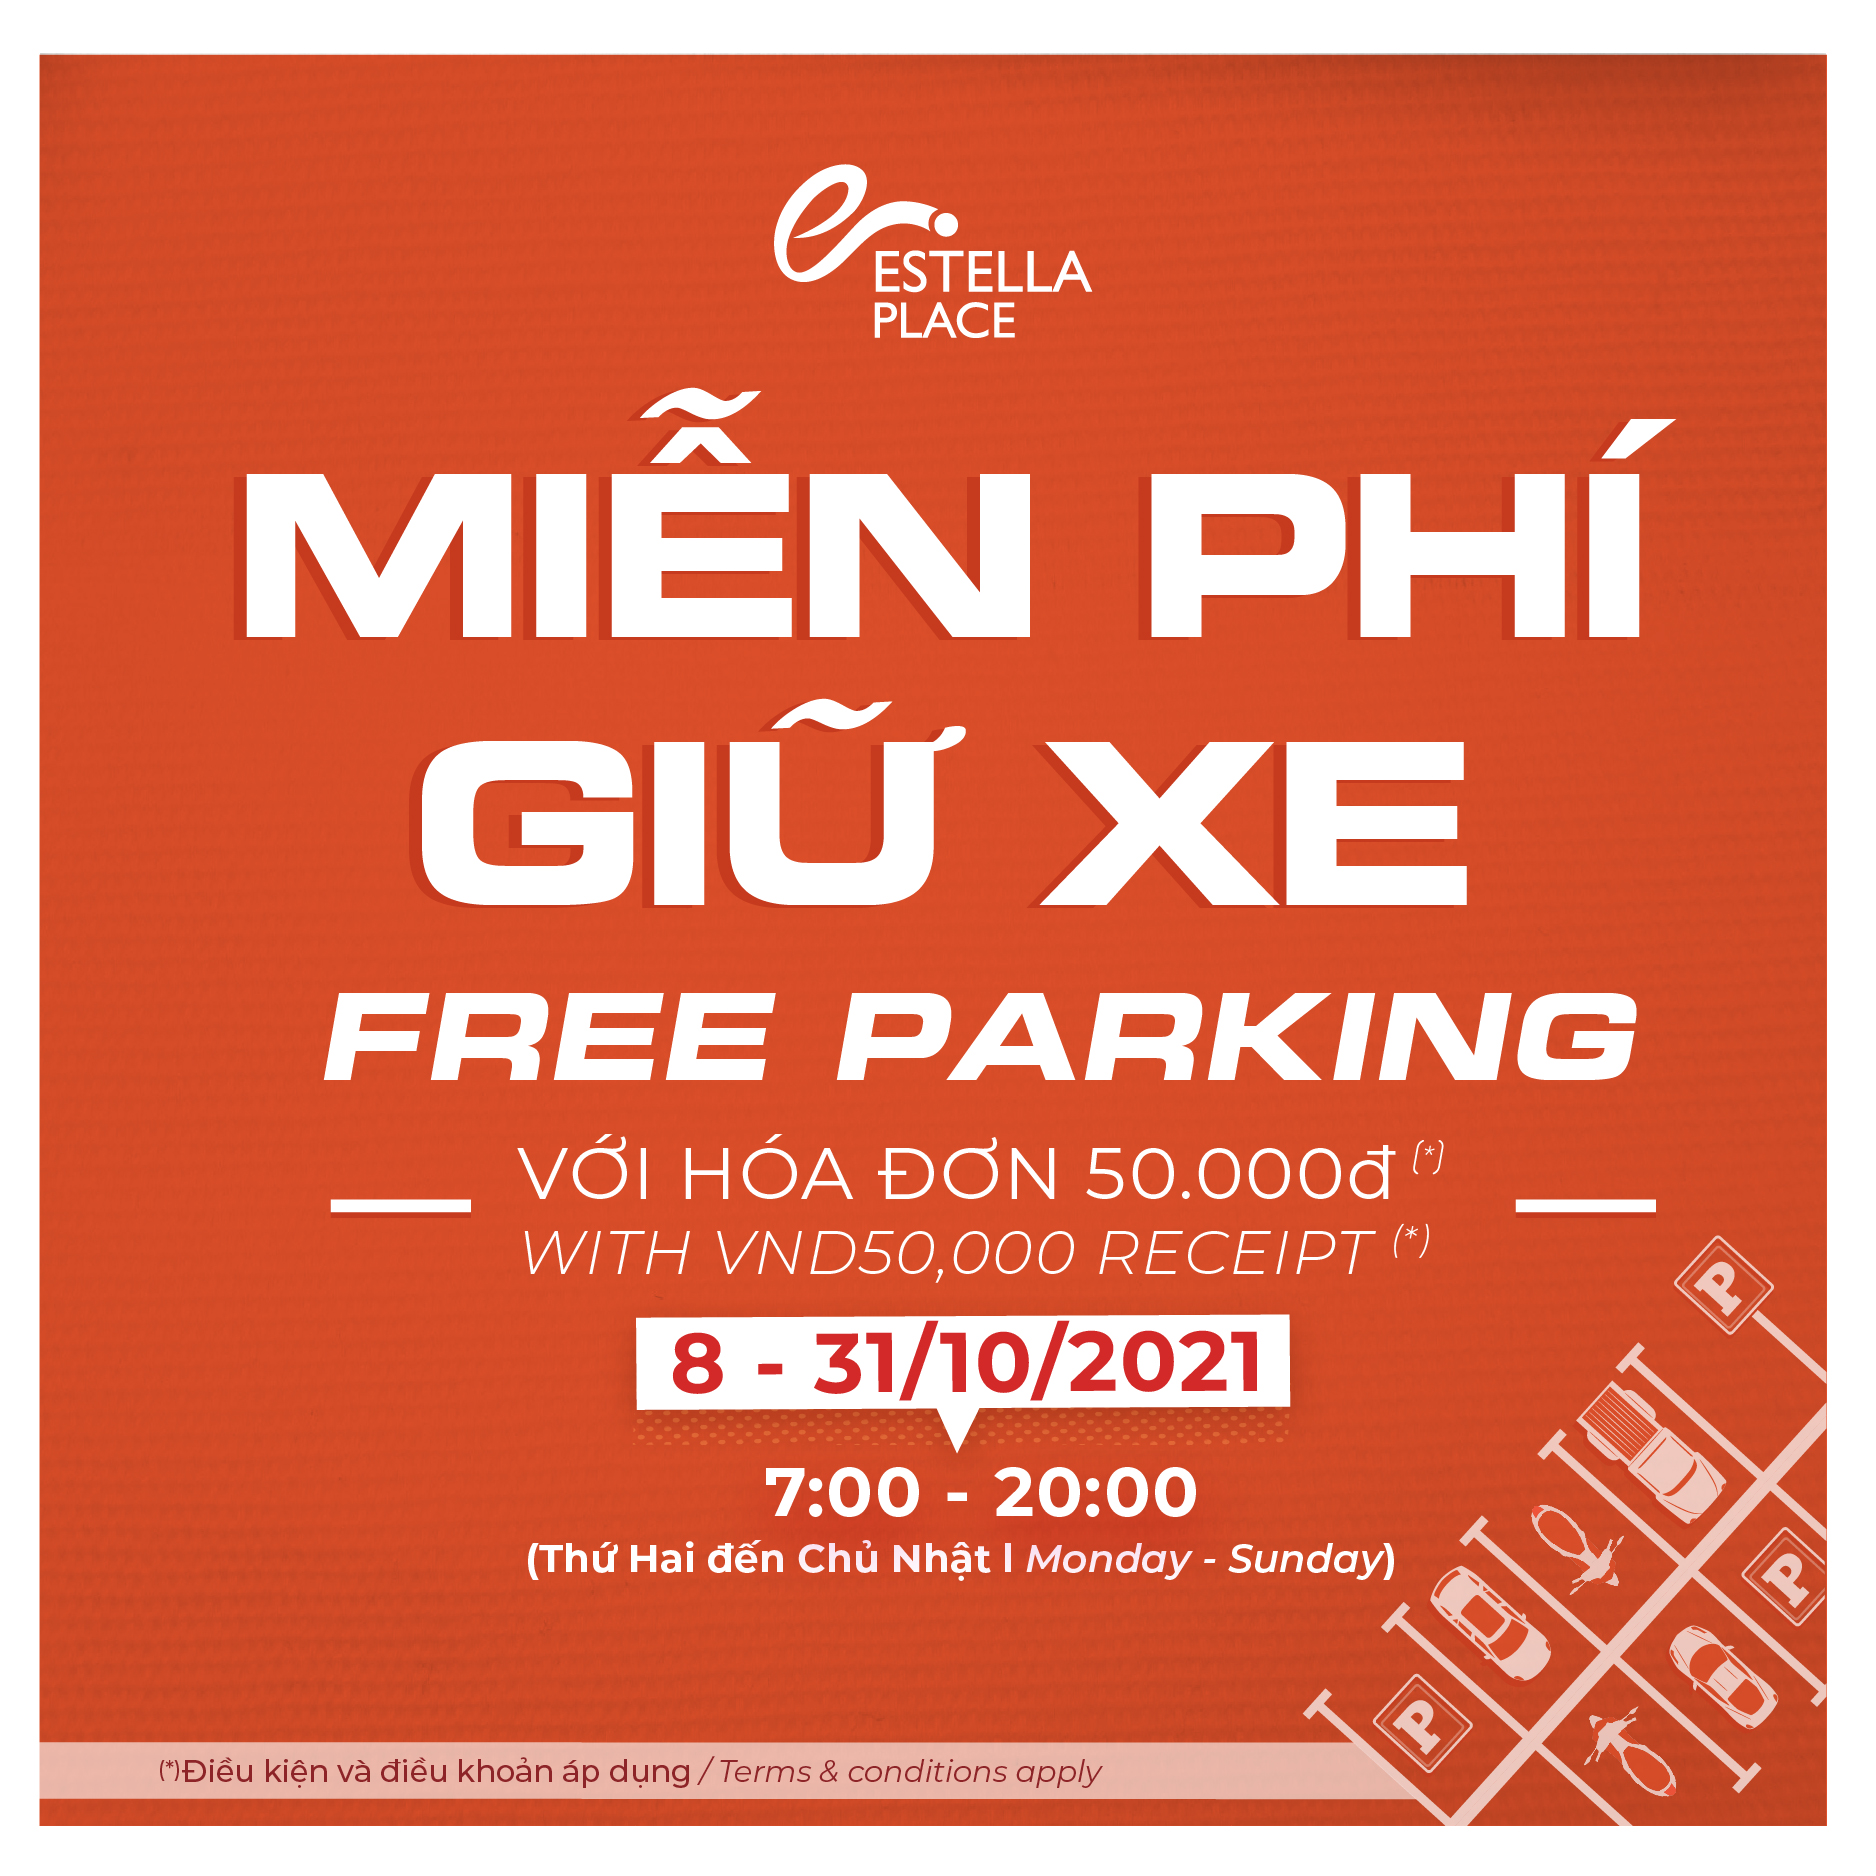 🚗 FREE PARKING WITH VND50,000 RECEIPT 🔥